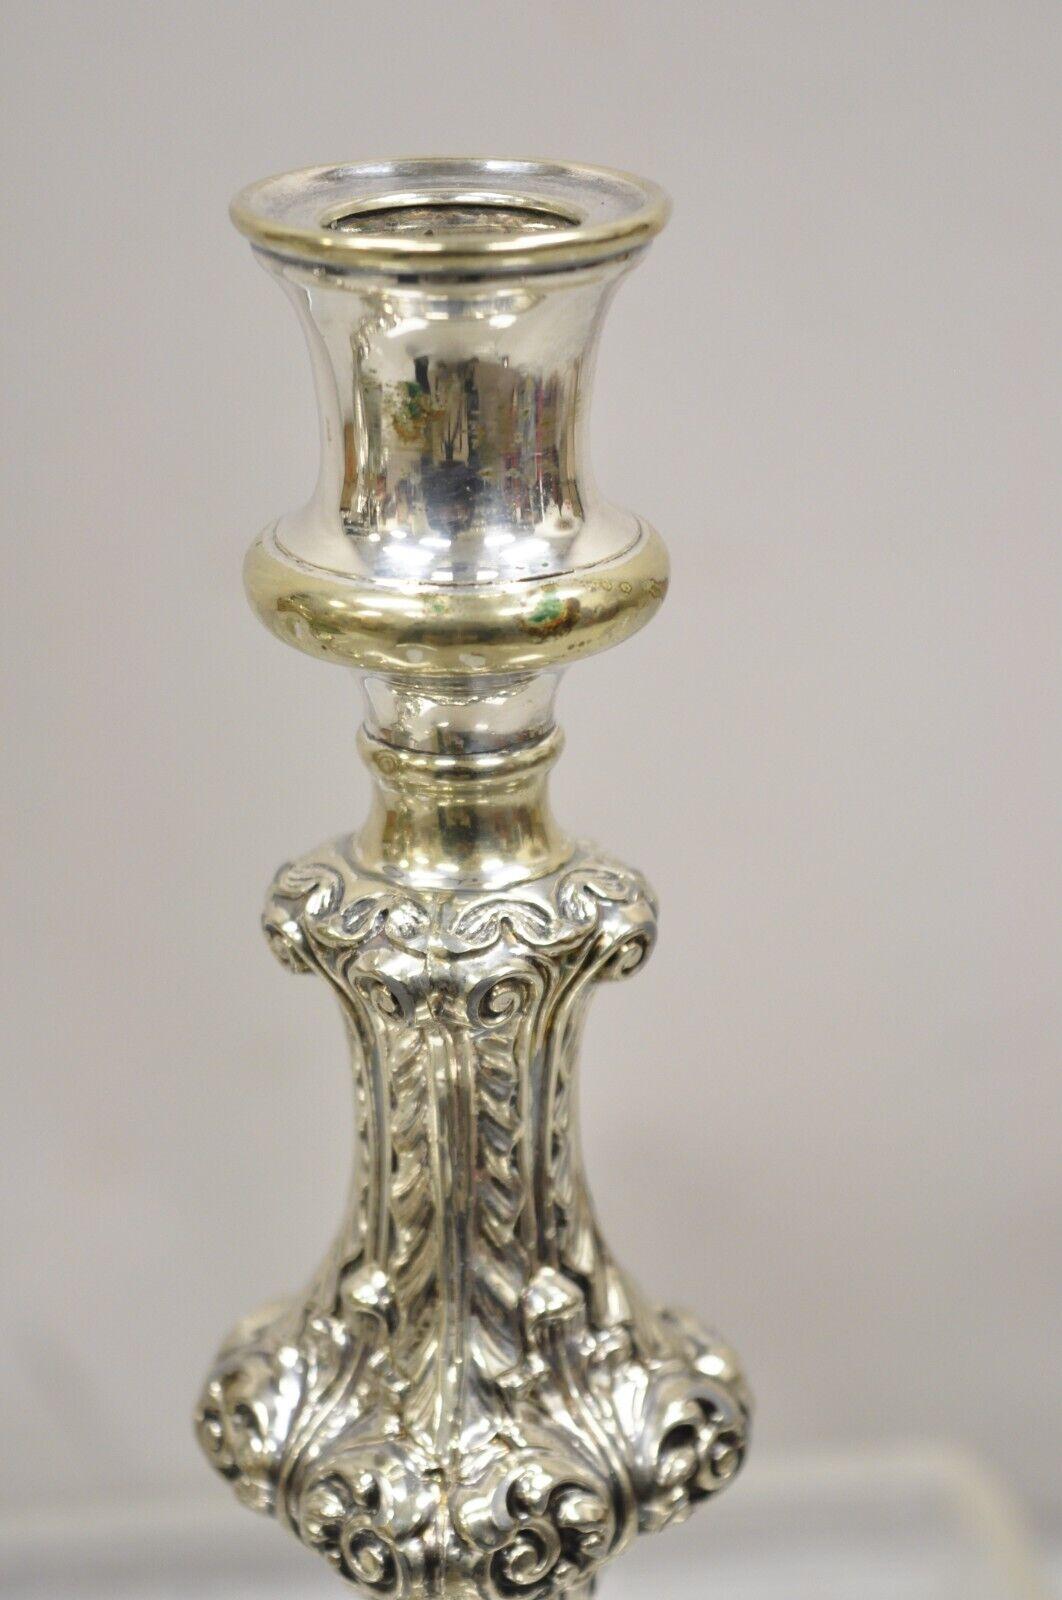 Vintage Gorham Baroque Repousse Silver Plated Single Candle Candlesticks a Pair In Good Condition For Sale In Philadelphia, PA